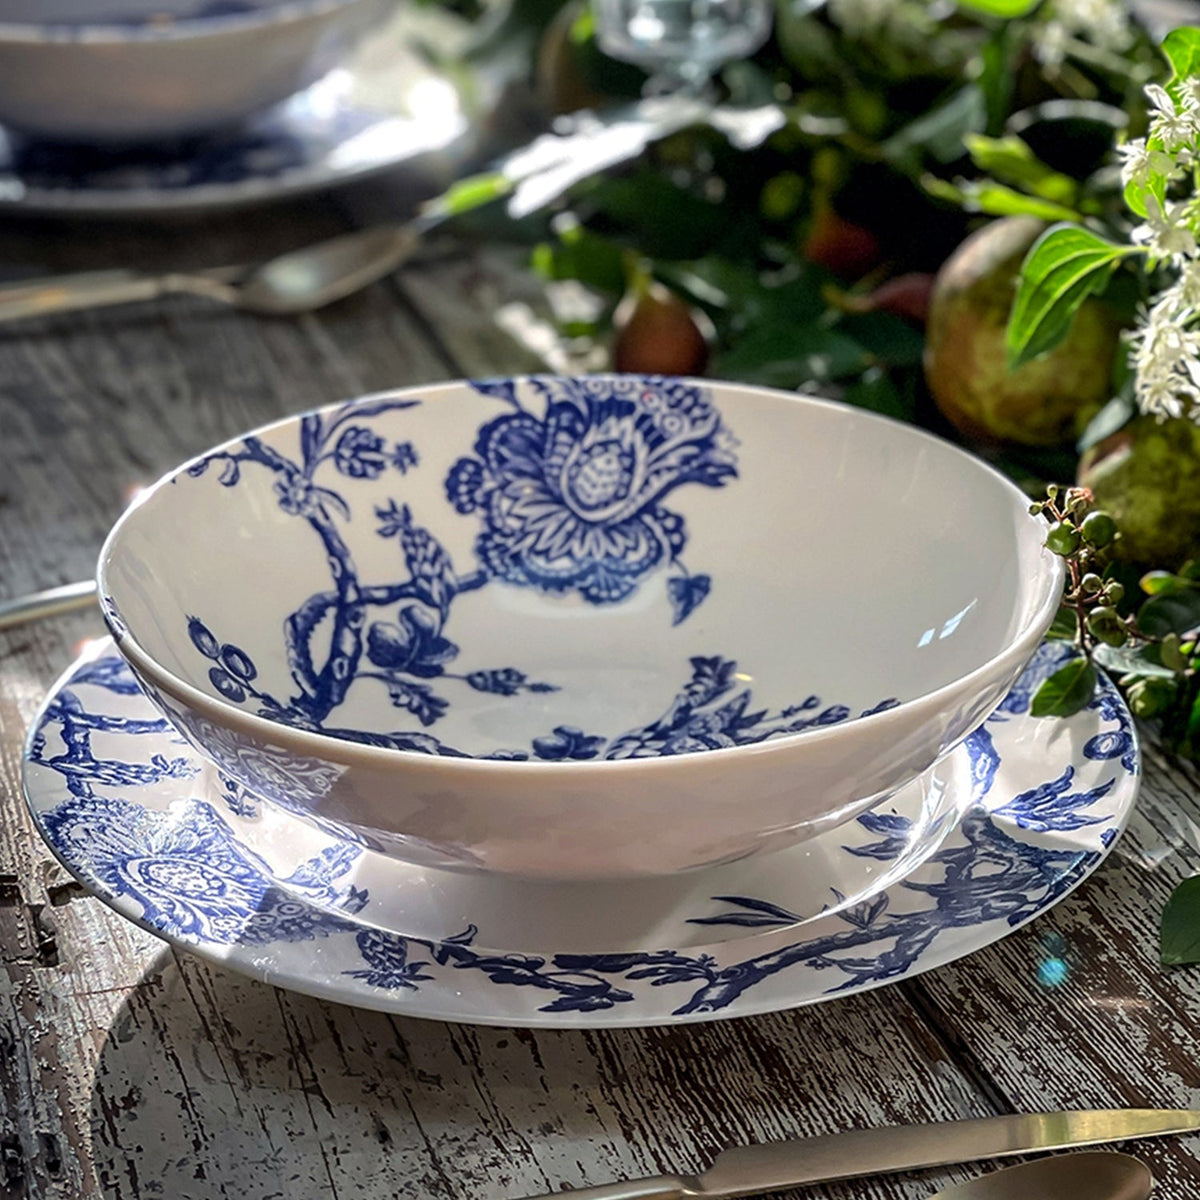 A generous Arcadia Entrée Bowl by Caskata Artisanal Home with blue floral patterns, part of the premium porcelain dinnerware collection inspired by the Williamsburg Foundation, rests on a matching plate on a rustic wooden table with greenery and fruit decorations in the background.